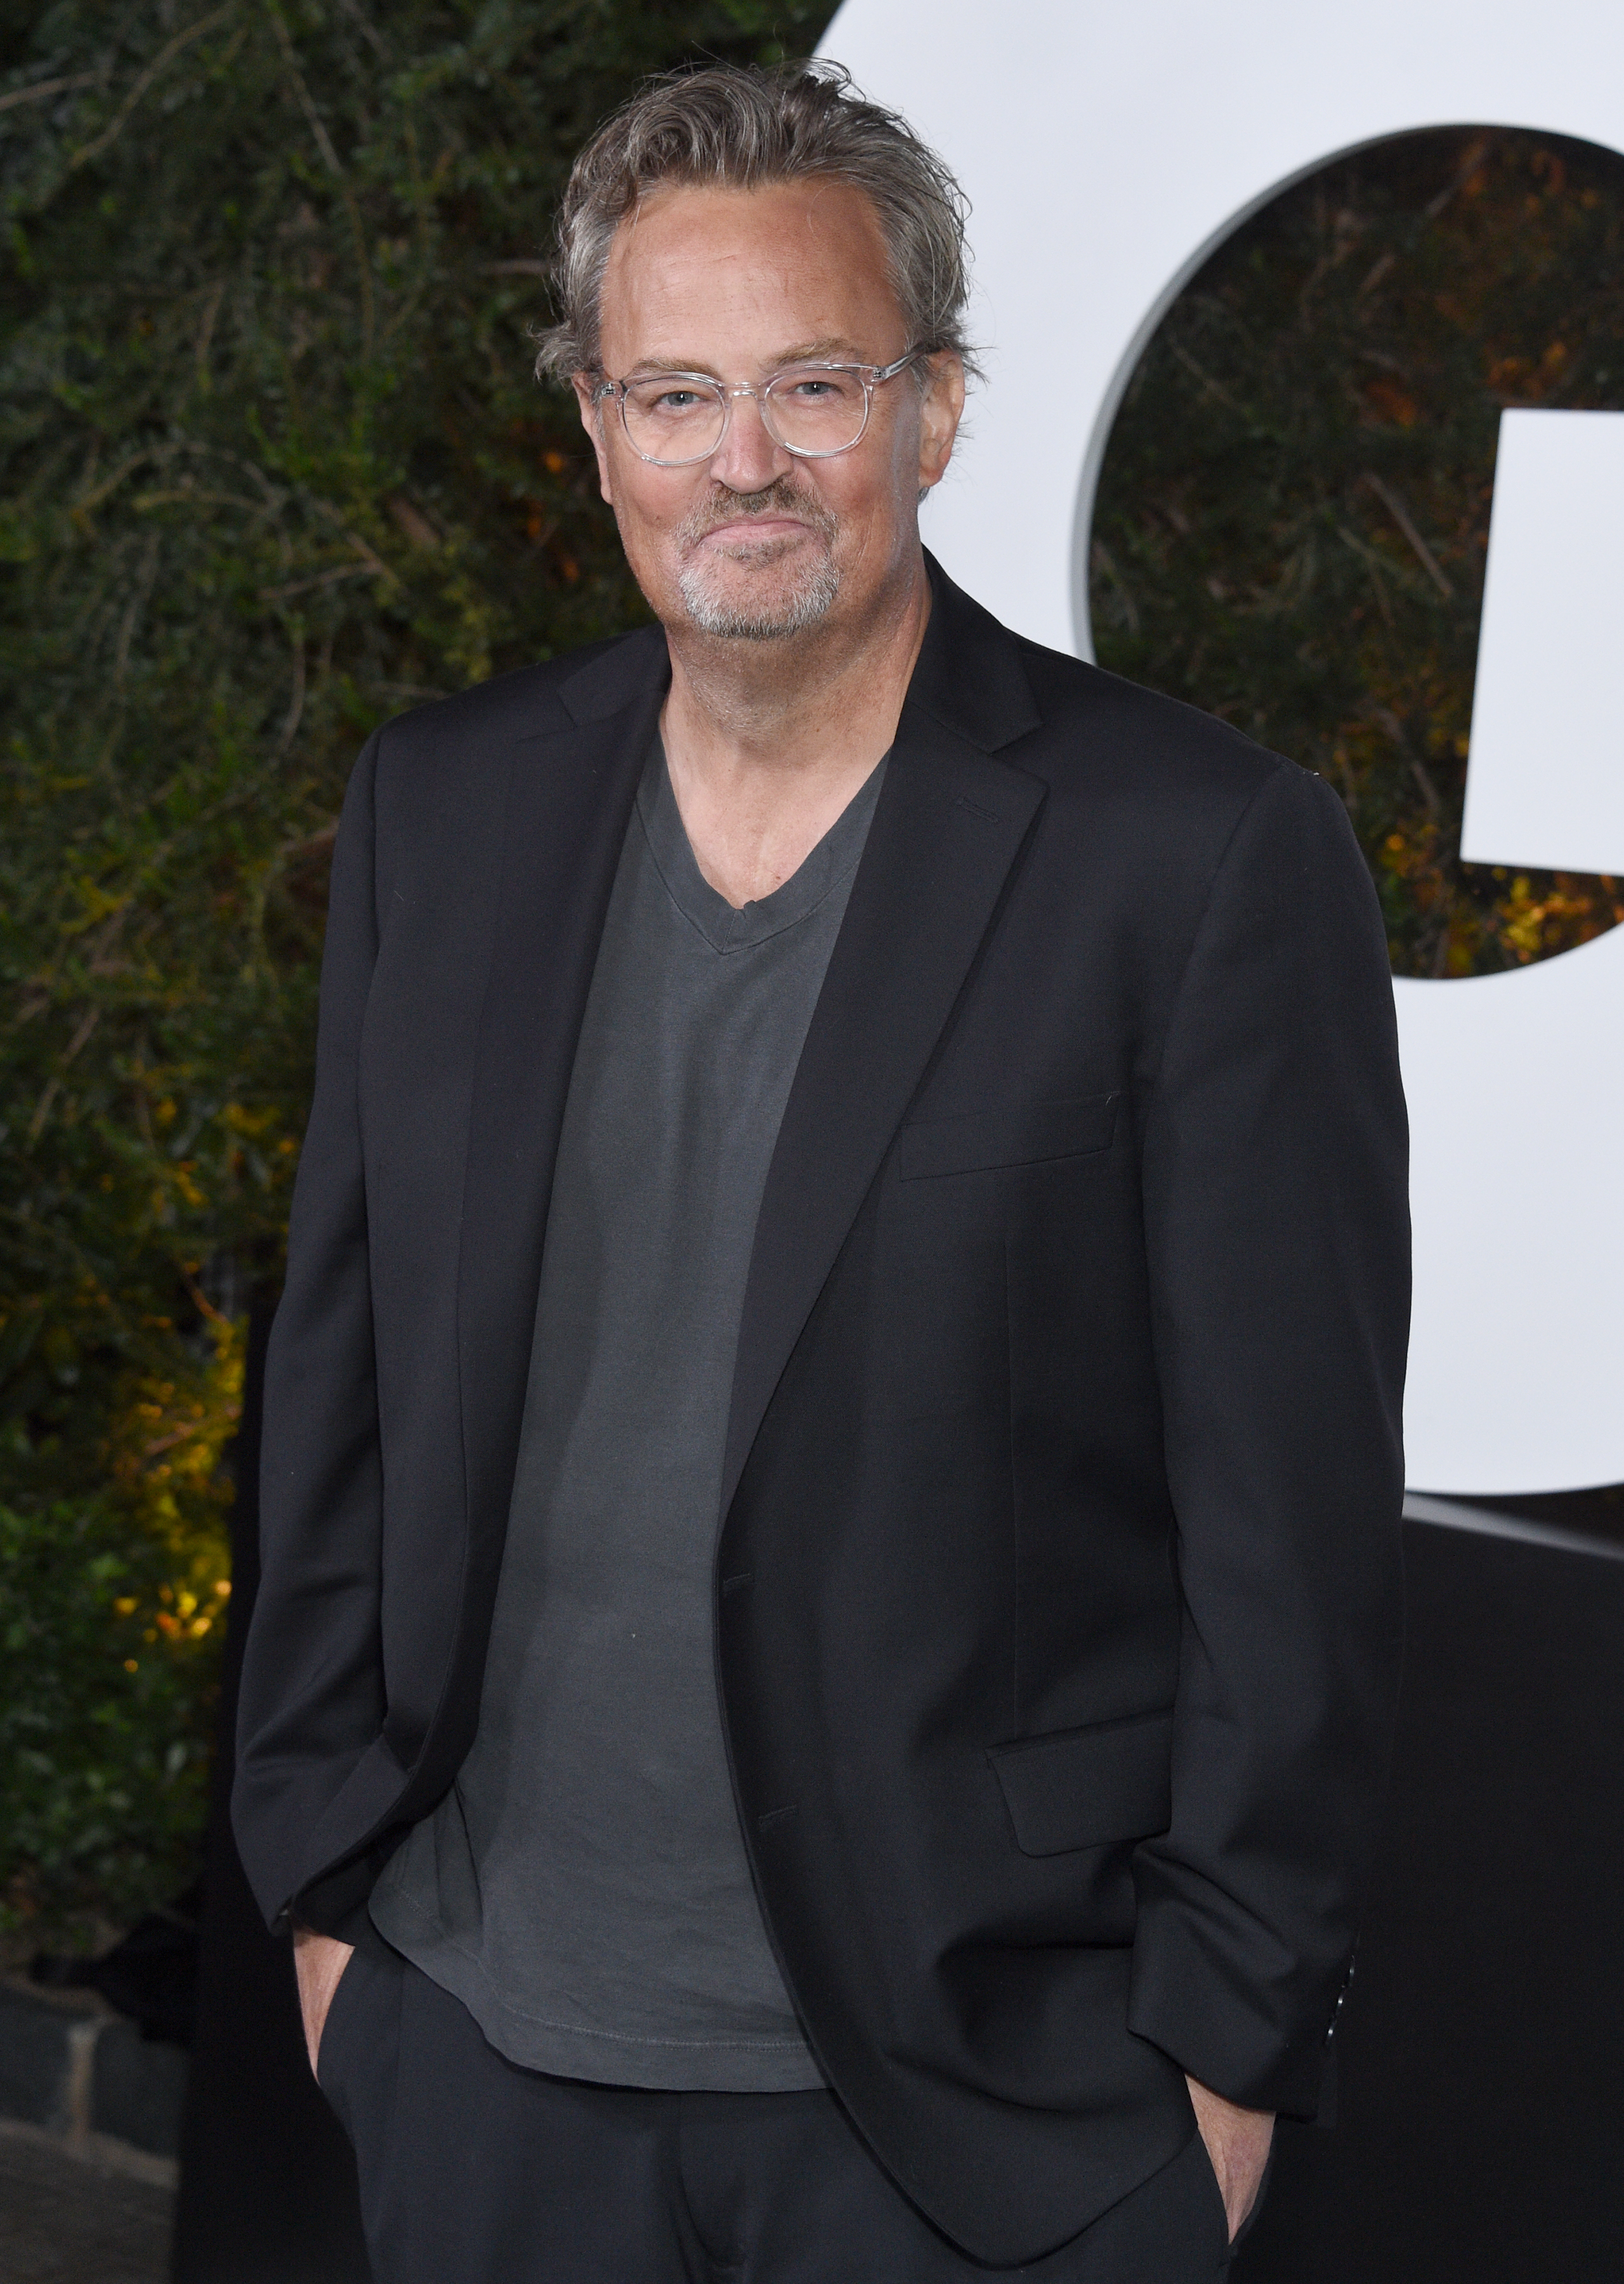 wearing a blazer over a t-shirt with glasses and grey hair combed back